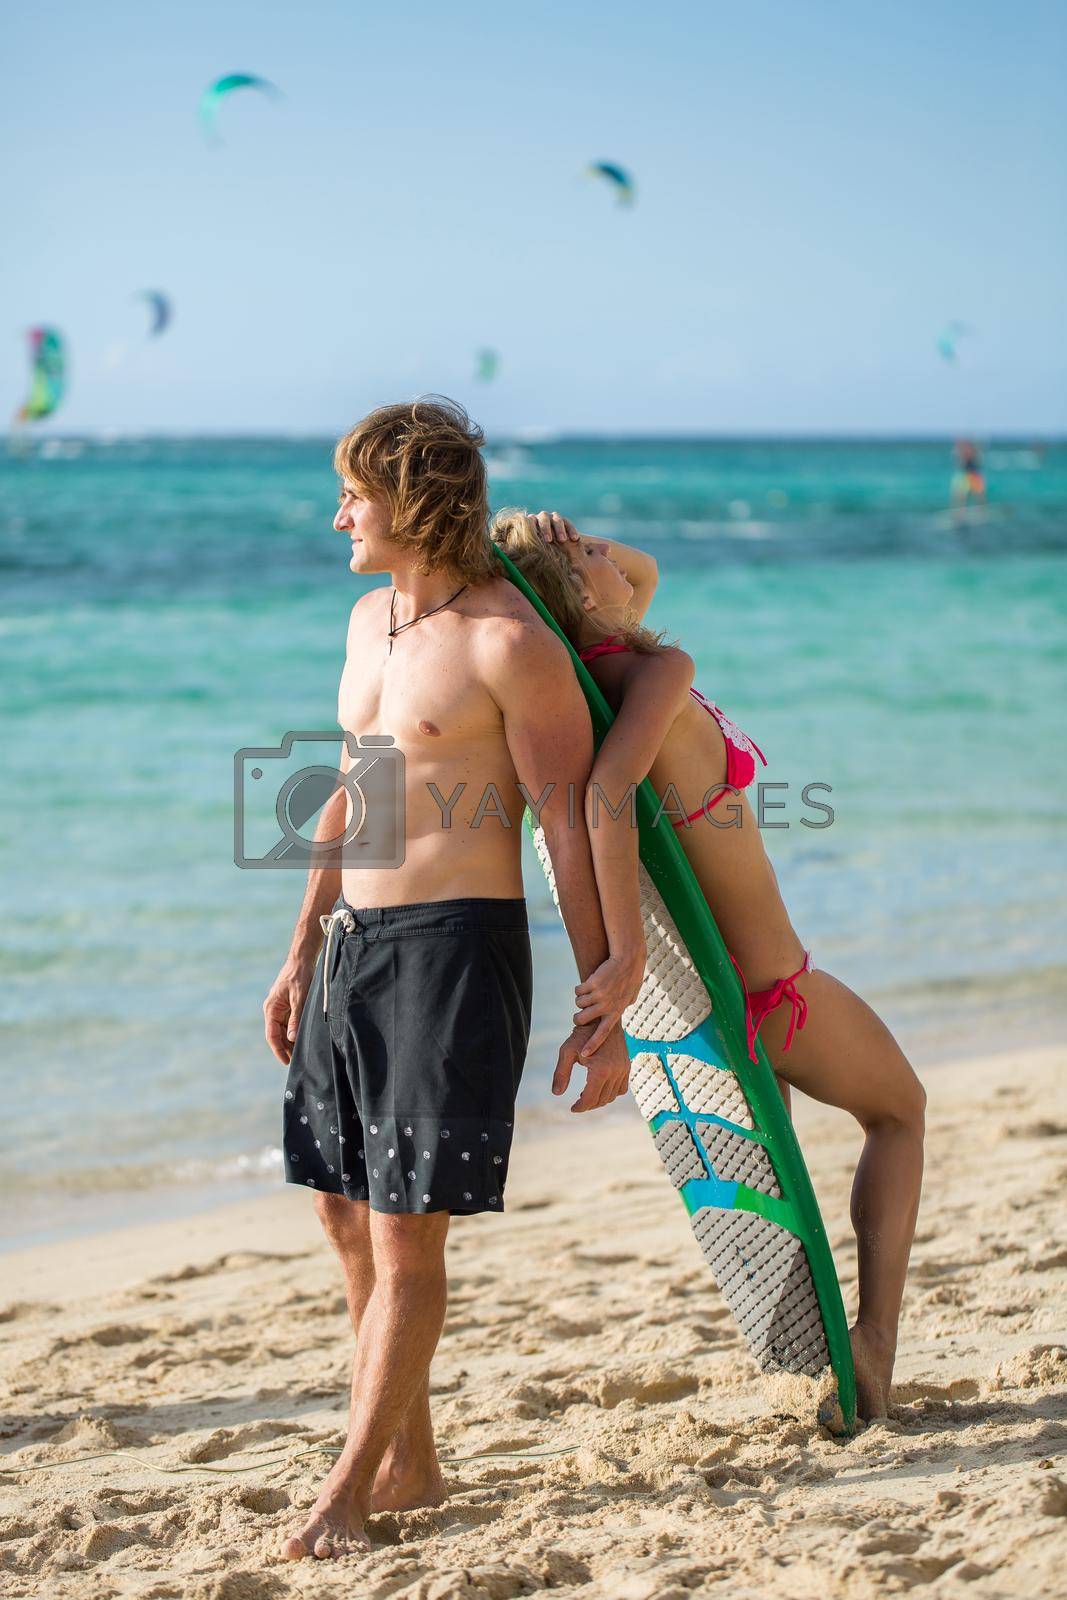 Young couple on beach with surfboard in arm. Surfing and outdoor sport lifestyle concept.